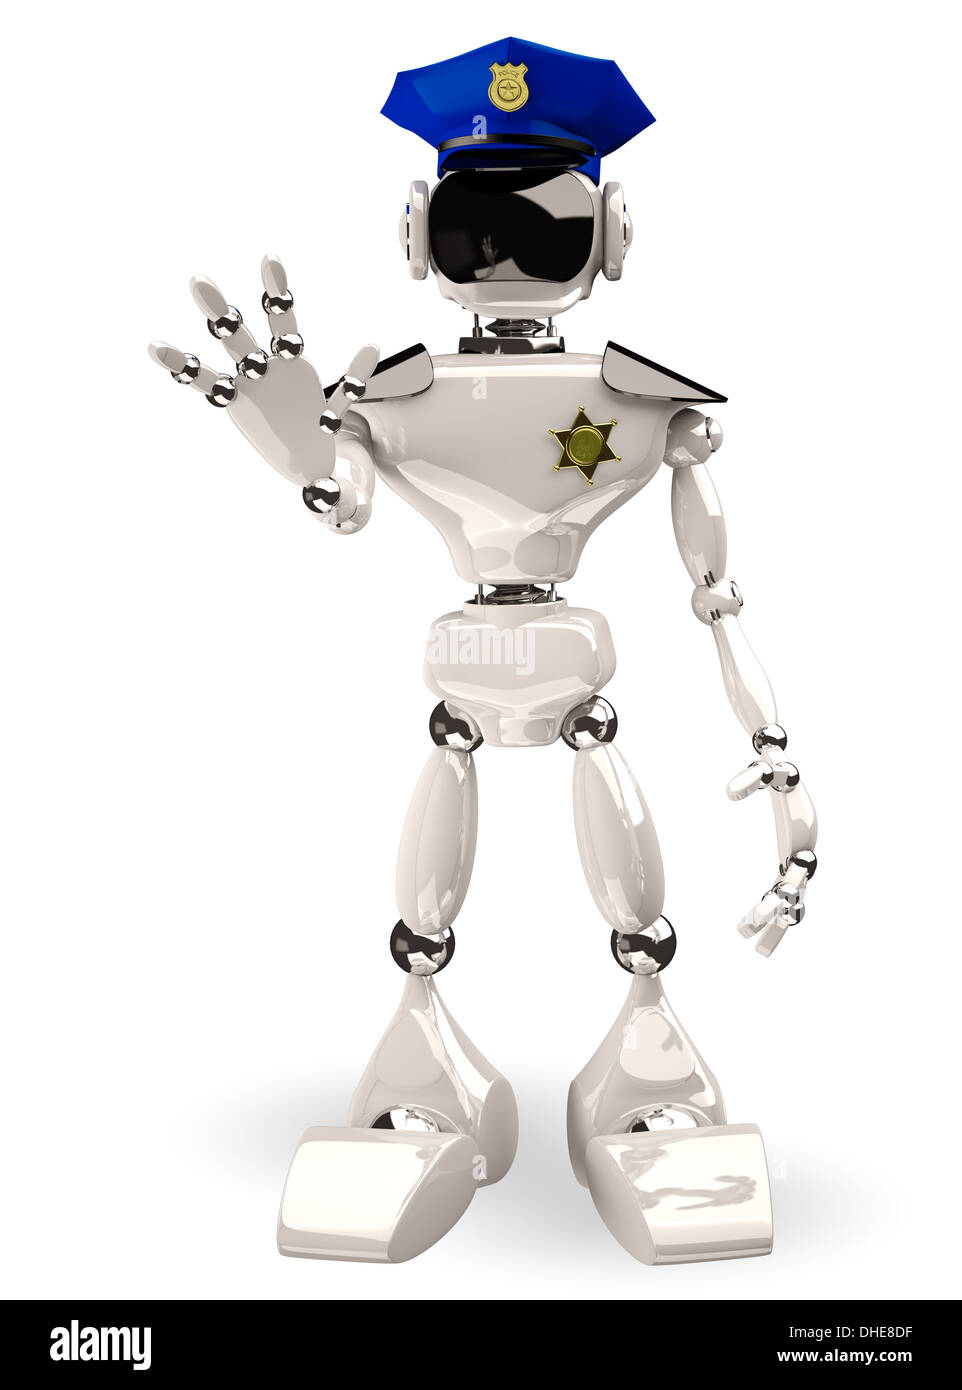 3d illustration of a cop robot on white background Stock Photo - Alamy